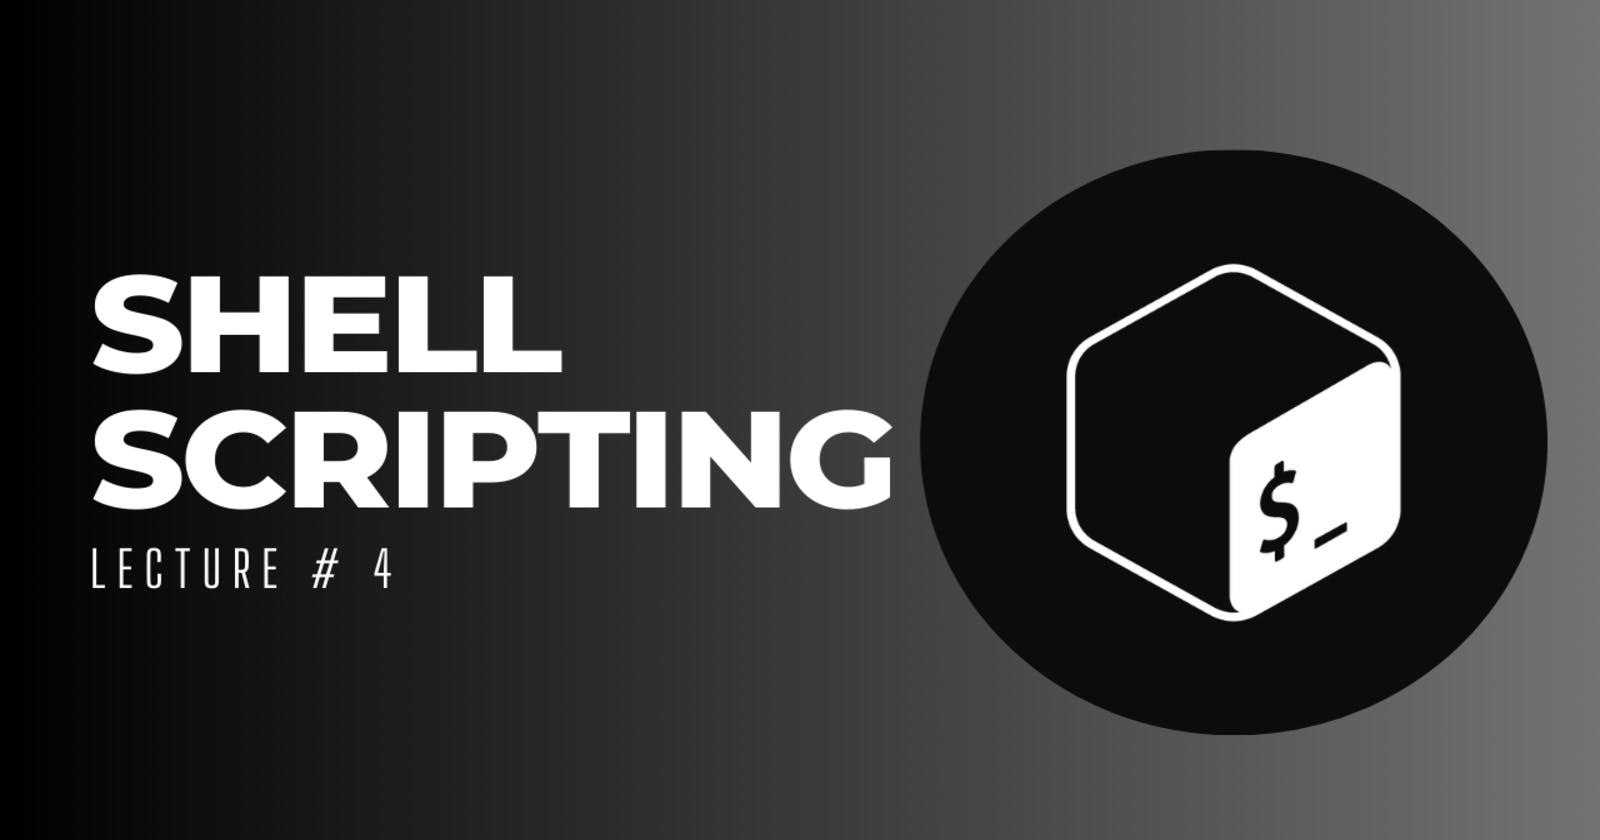 Lecture # 4 - Decision Making in Shell Script